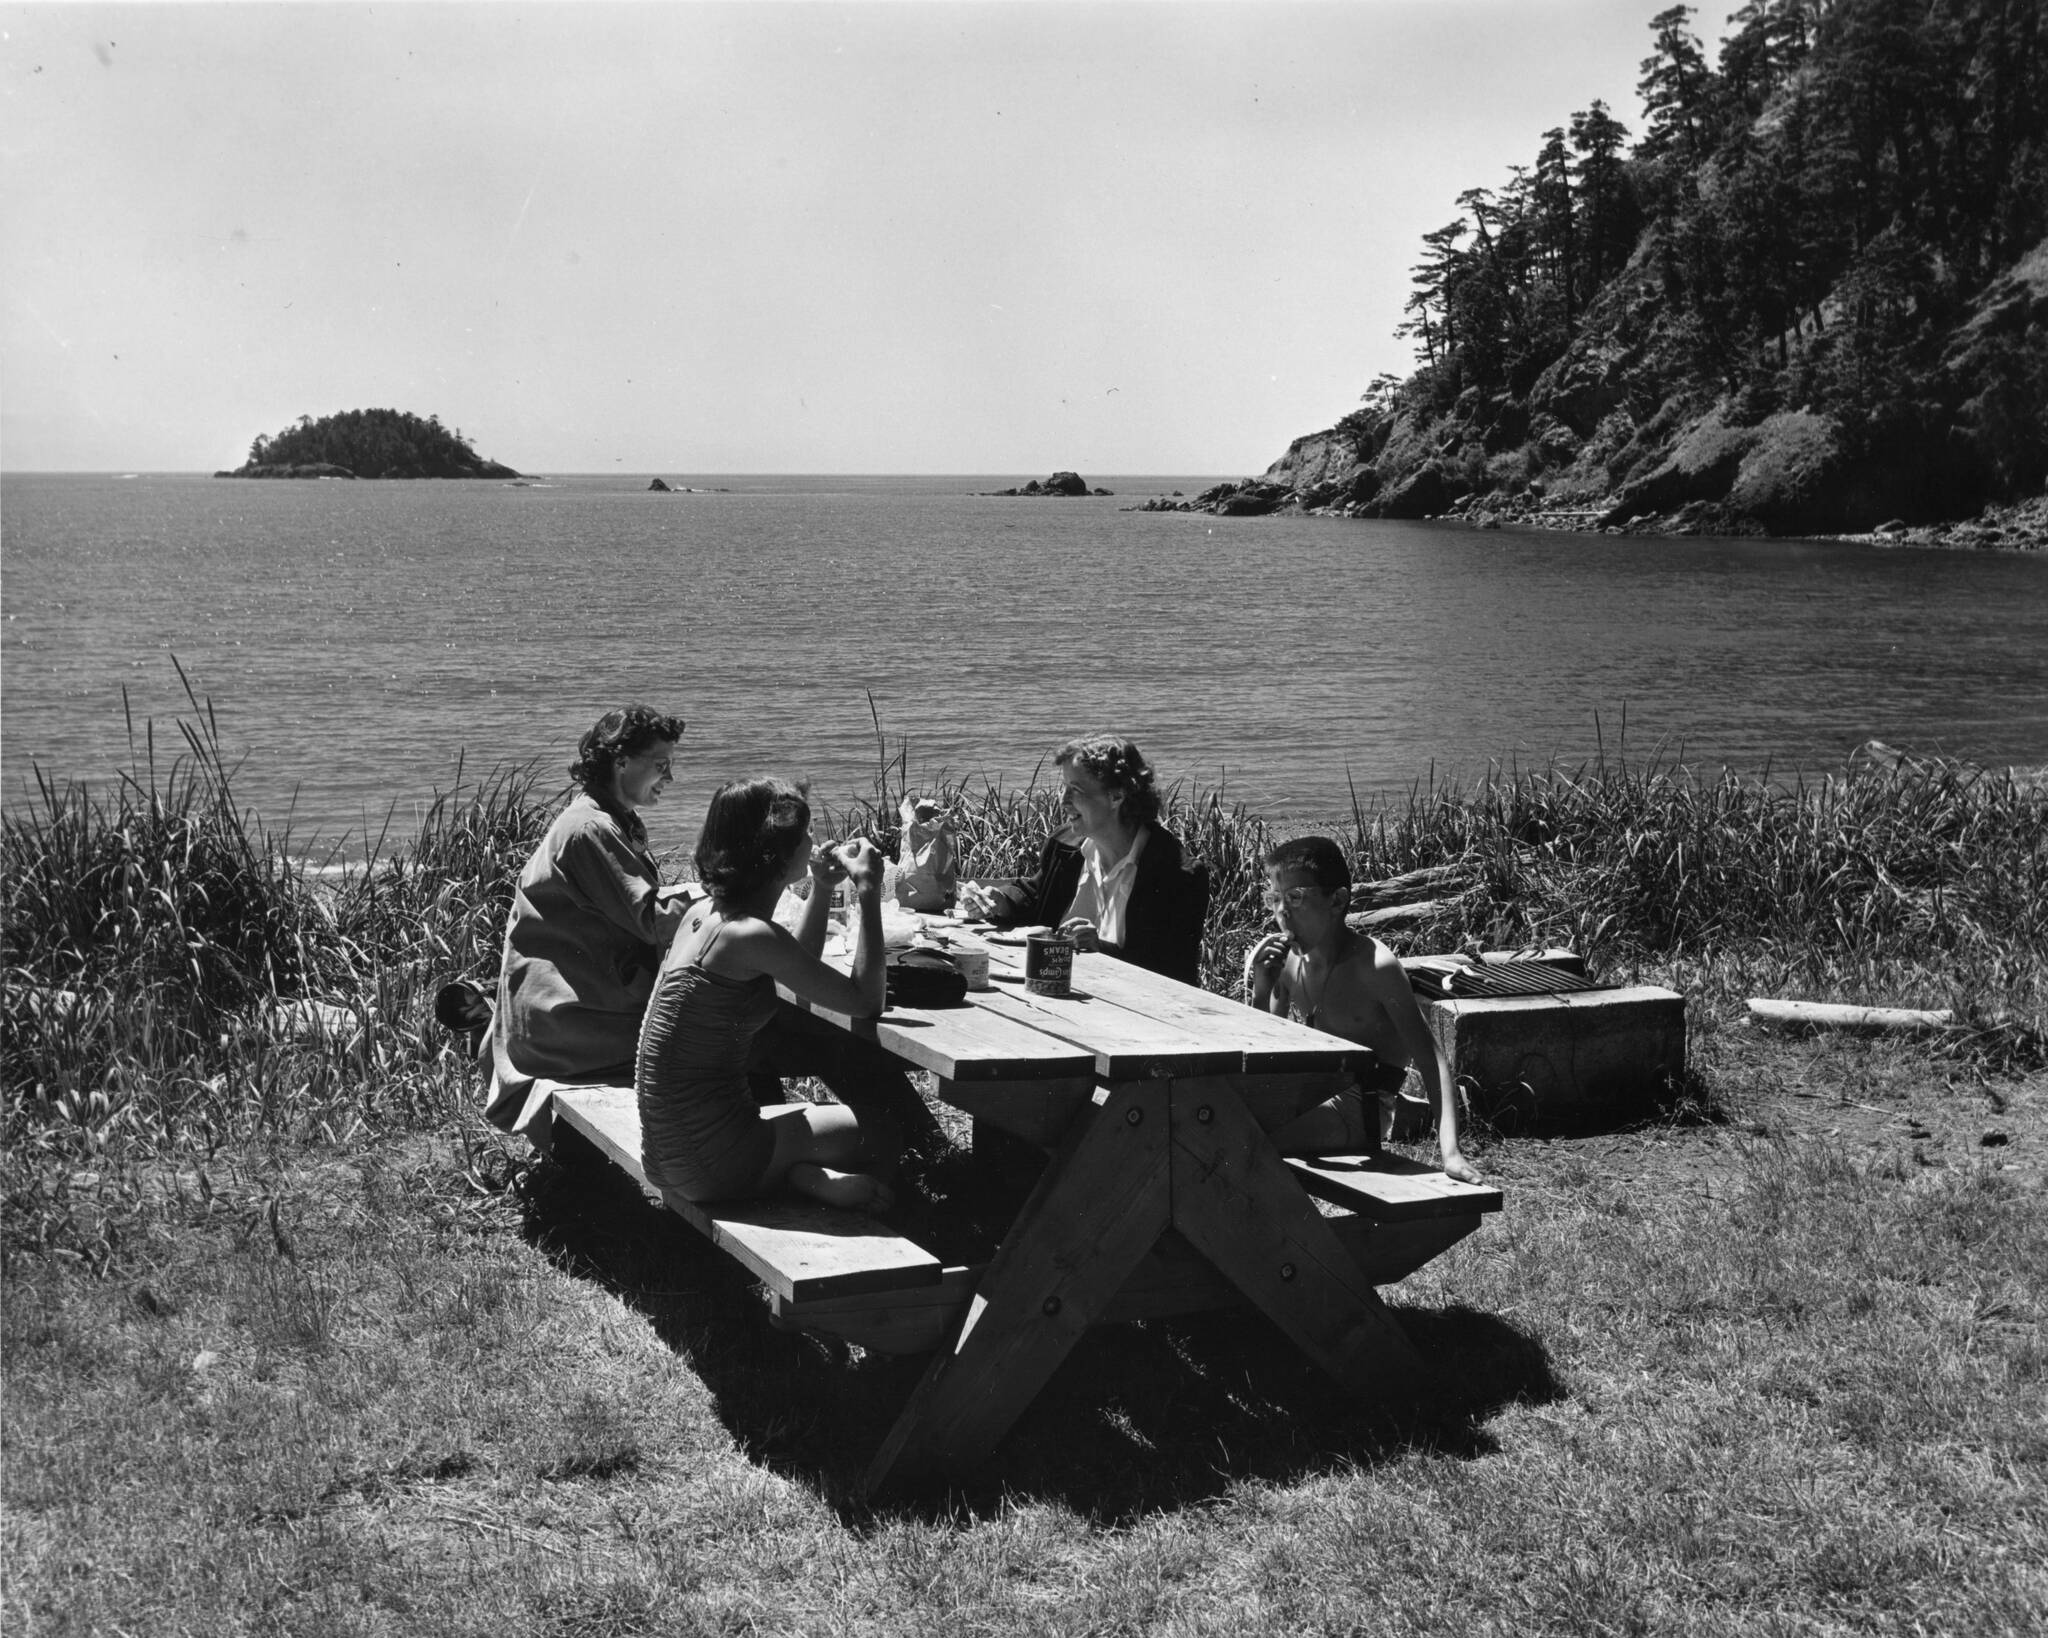 Washington State Advertising Commission
A family has a picnic in Deception Pass State Park, circa 1960.